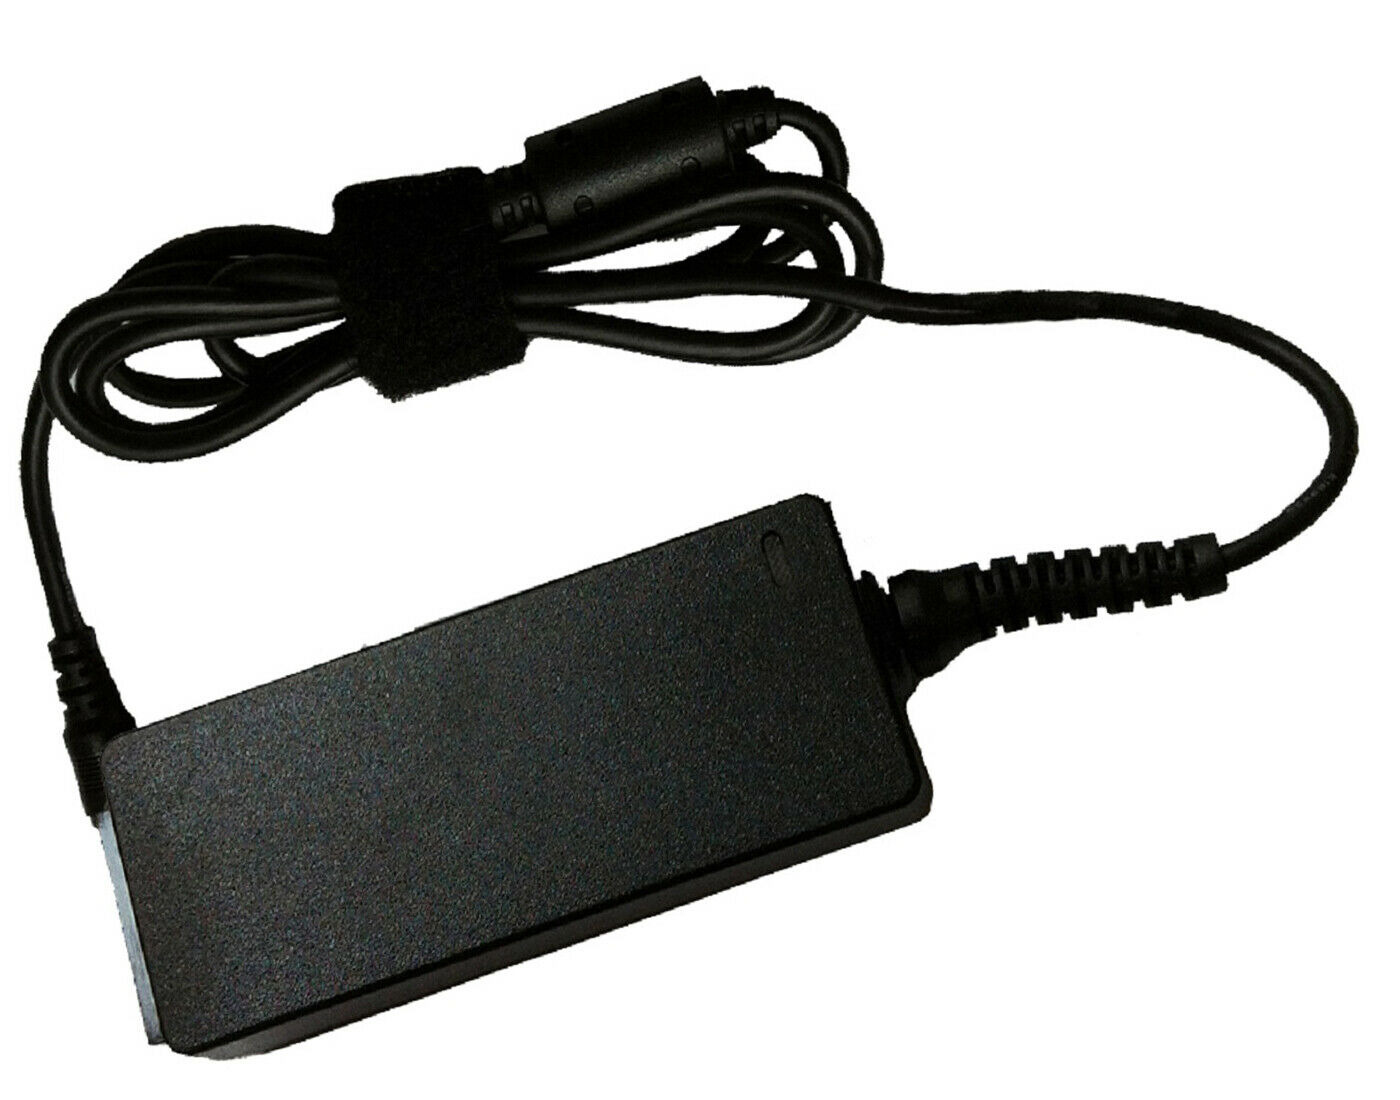 4-pin AC adapter fit Monoprice 9579 10489 10509 27